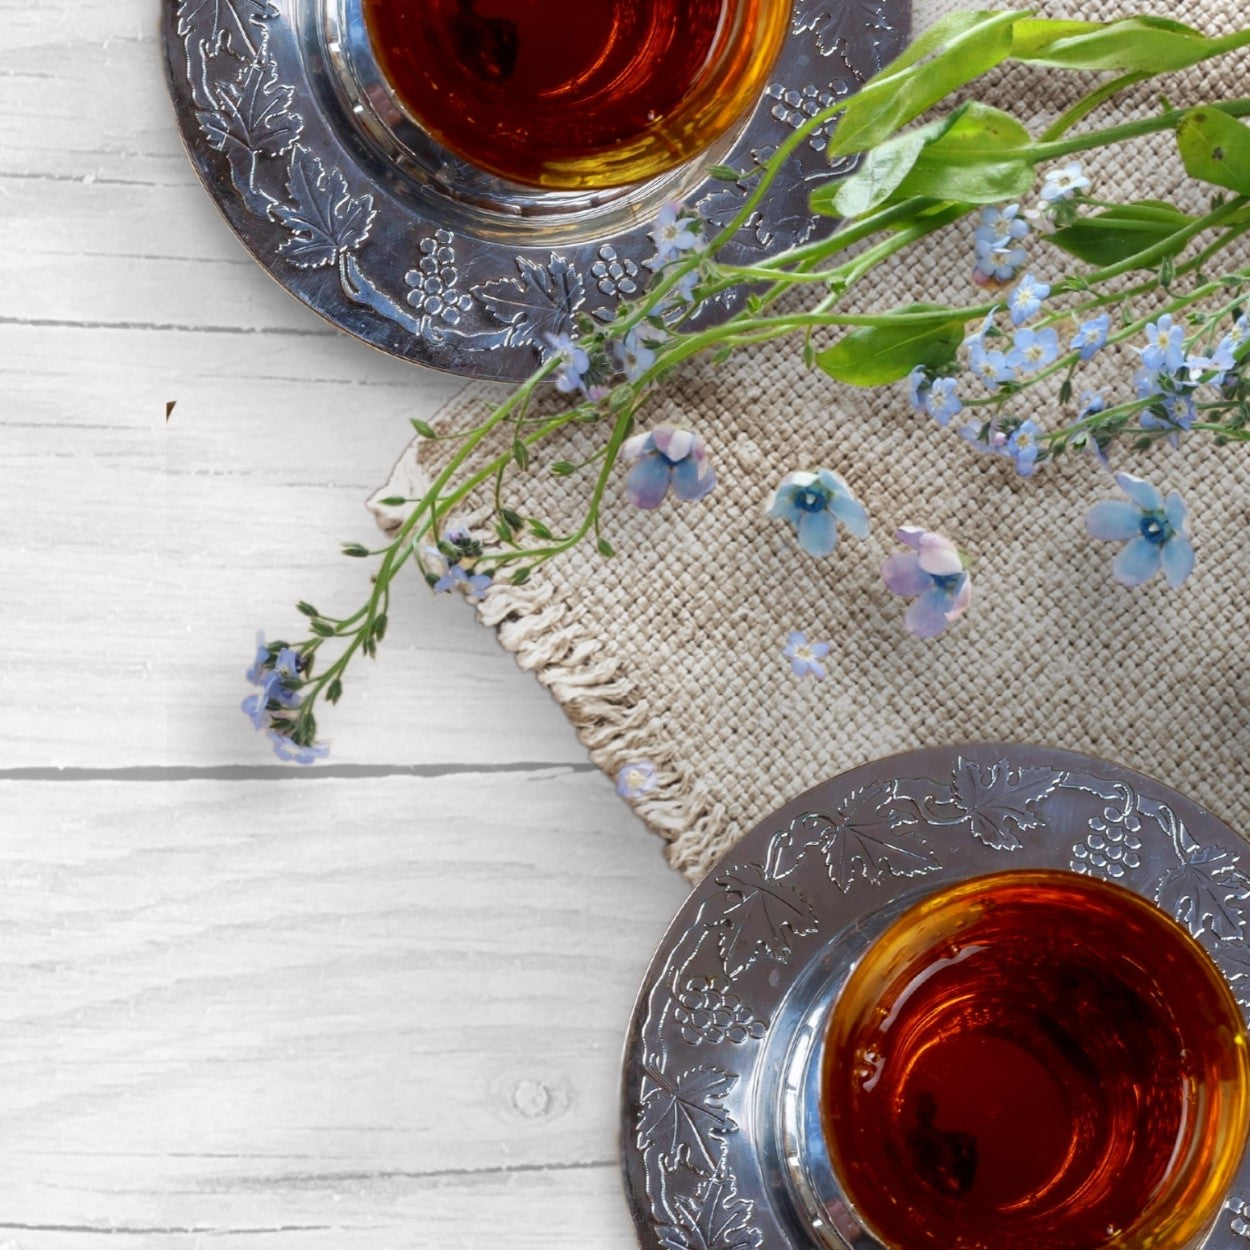 An elegant Passover setting with two glasses of red wine on a traditional silver tray, adorned with delicate blue flowers and placed on a natural woven placemat.